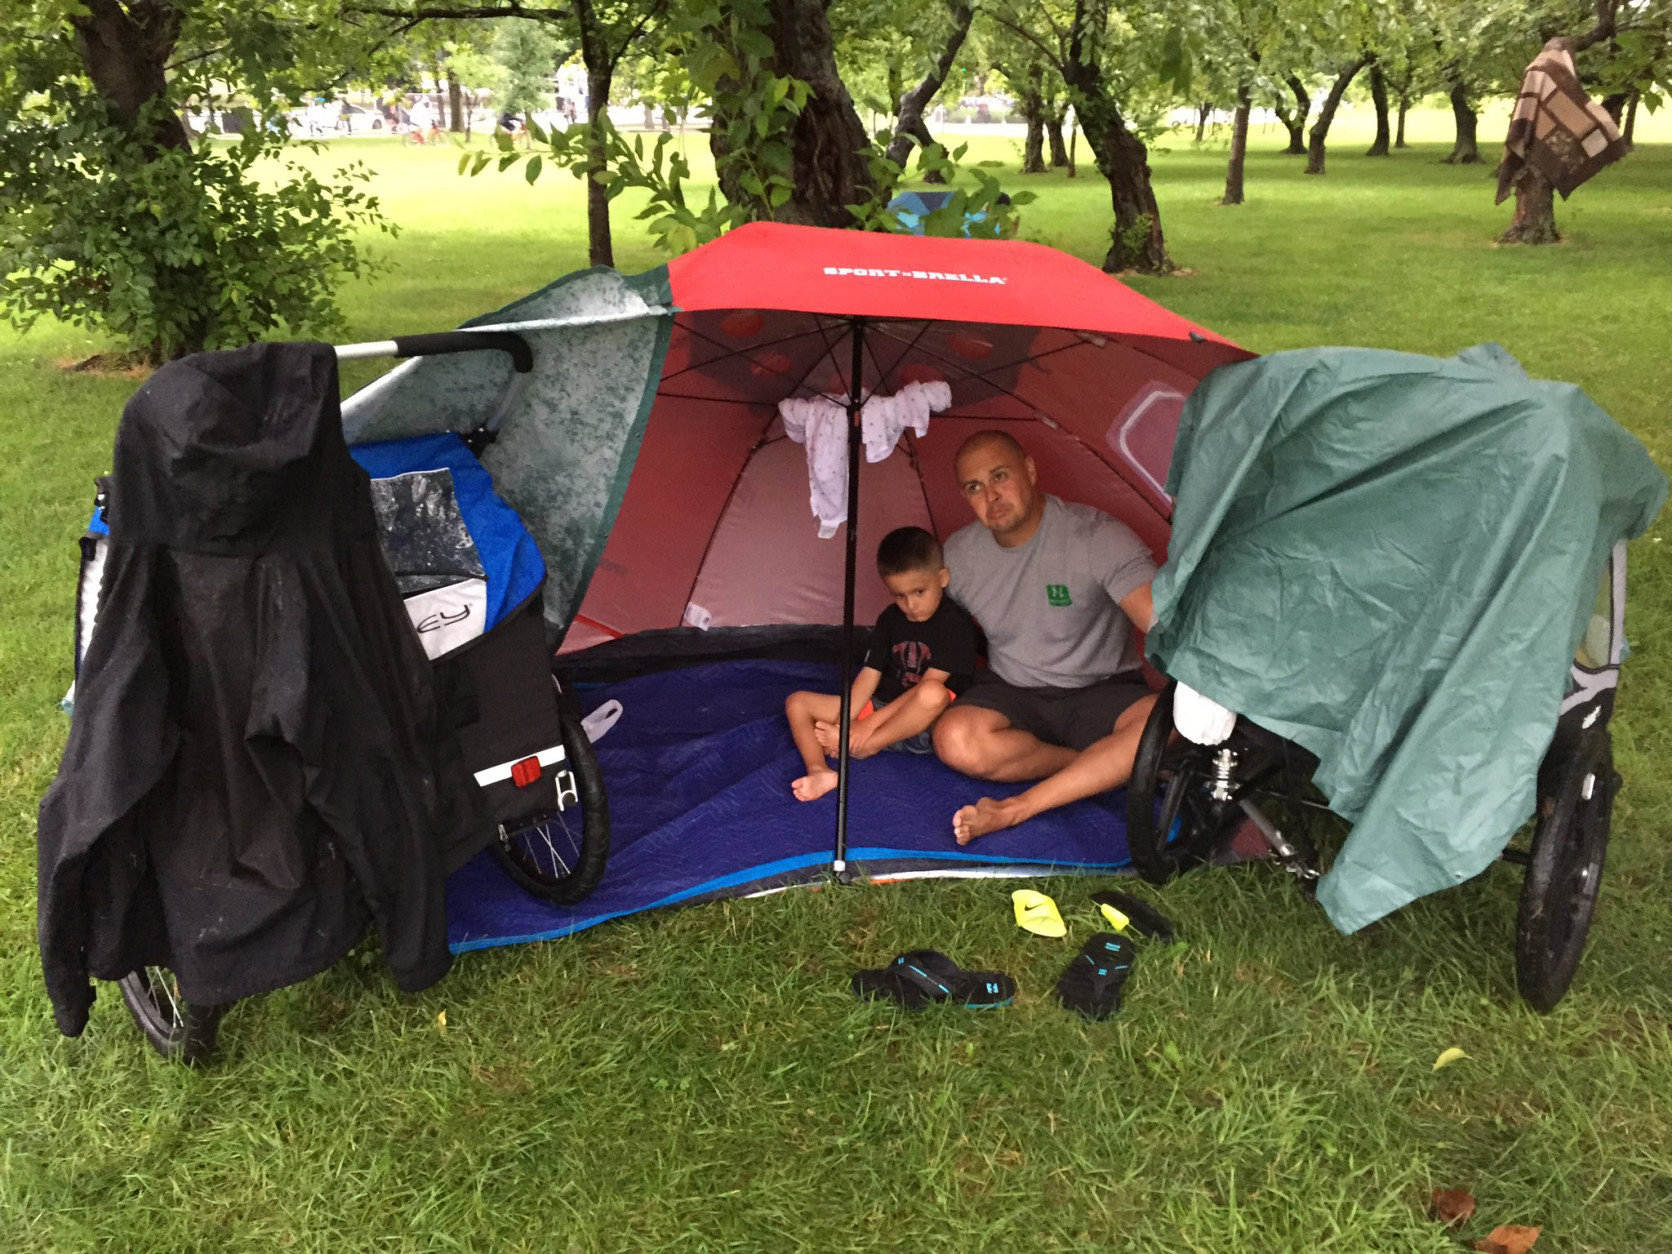 This family created a "base camp" to stay dry. They got to the National Mall at around 1 p.m. to prepare for the Fourth of July festivities. (WTOP/Michelle Basch)